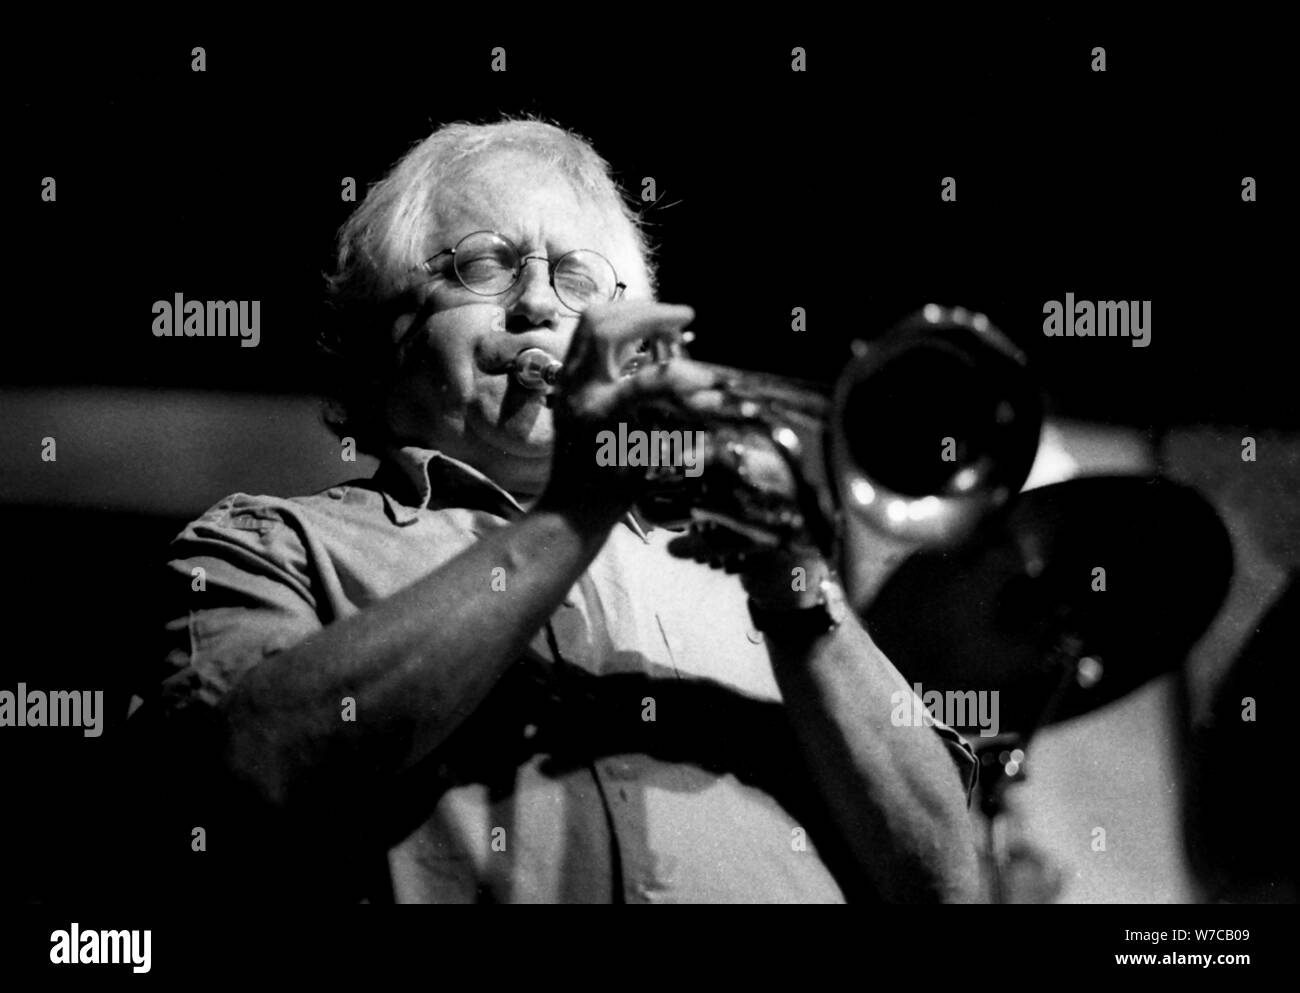 Henry Lowther, Watermill Jazz Club, Dorking, Surrey, Septembre, 2000. Artiste : Brian O'Connor. Banque D'Images